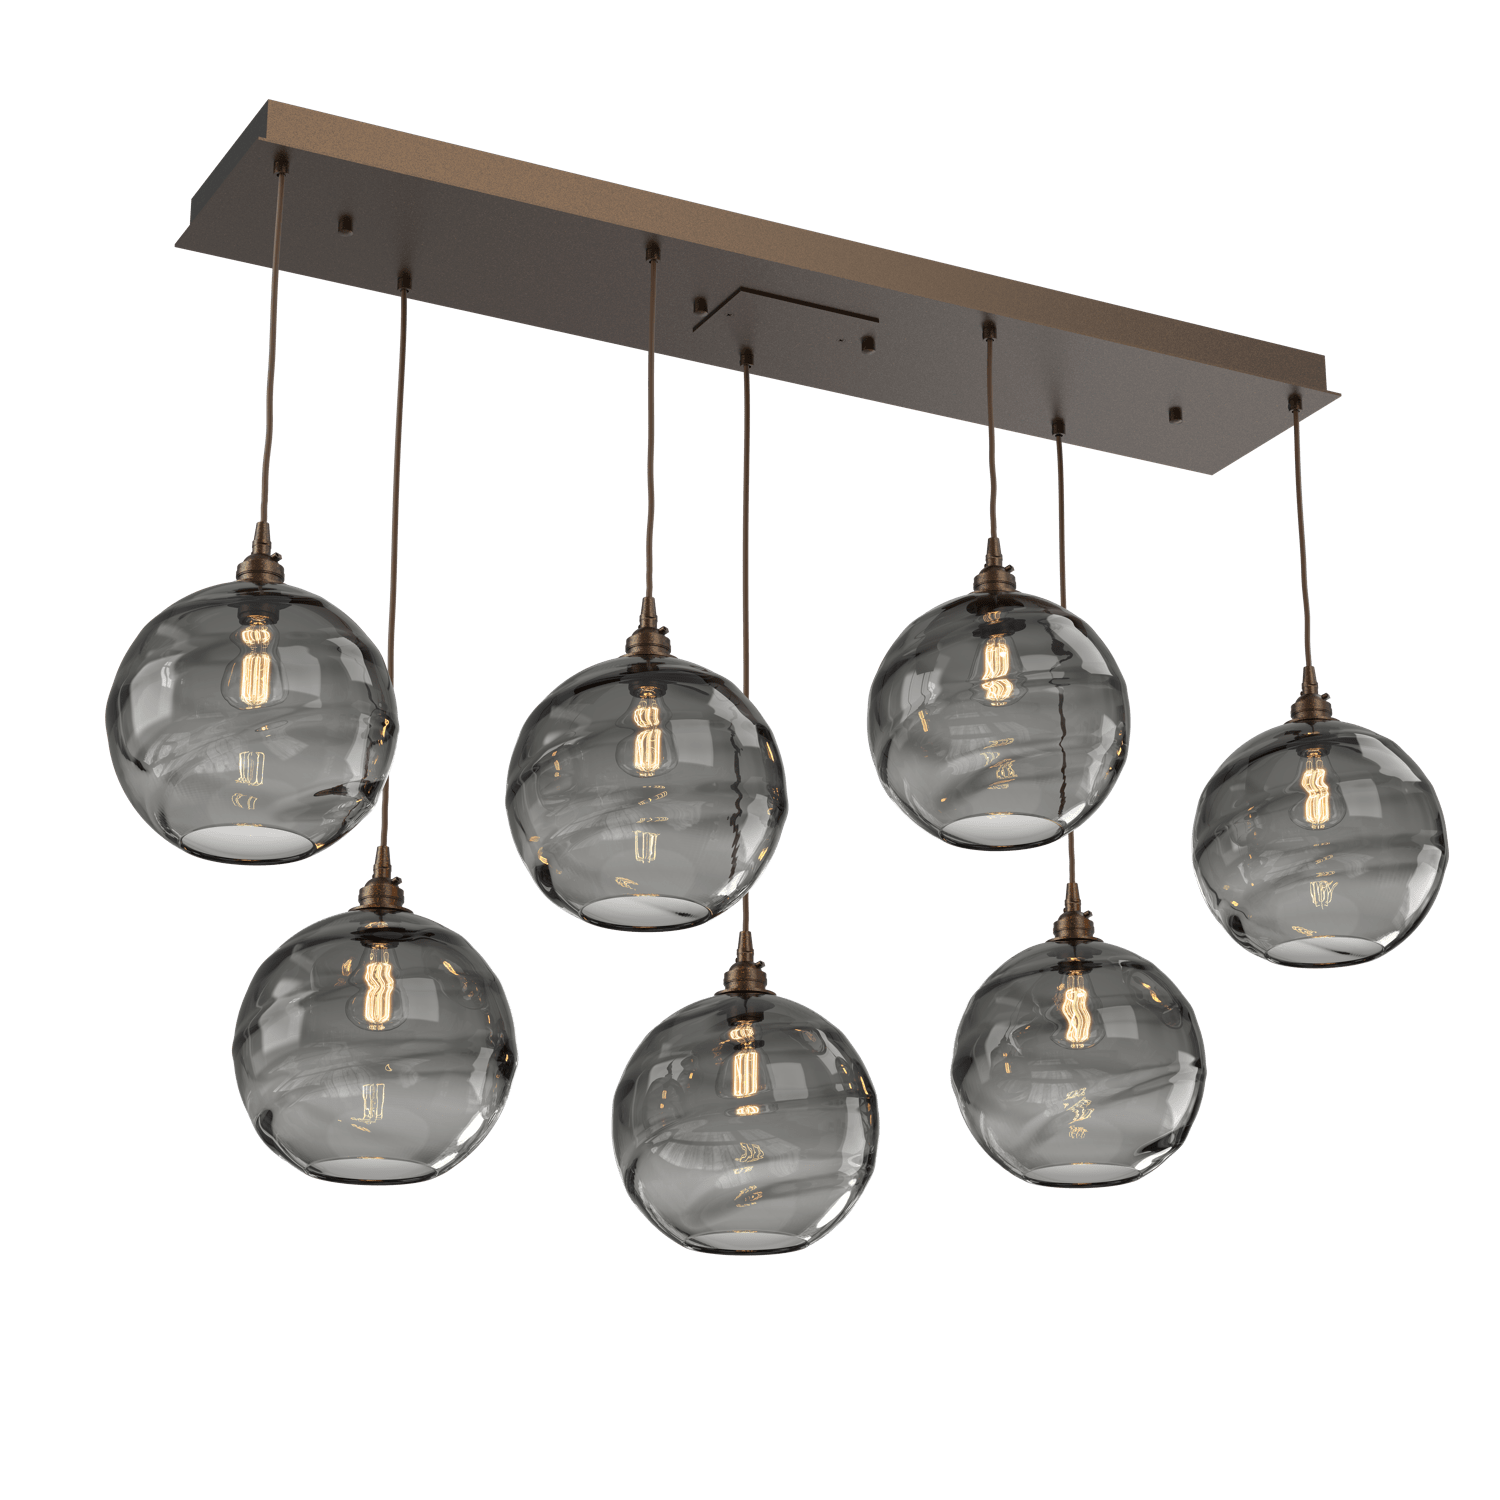 PLB0047-07-FB-OS-Hammerton-Studio-Optic-Blown-Glass-Terra-7-light-linear-pendant-chandelier-with-flat-bronze-finish-and-optic-smoke-blown-glass-shades-and-incandescent-lamping